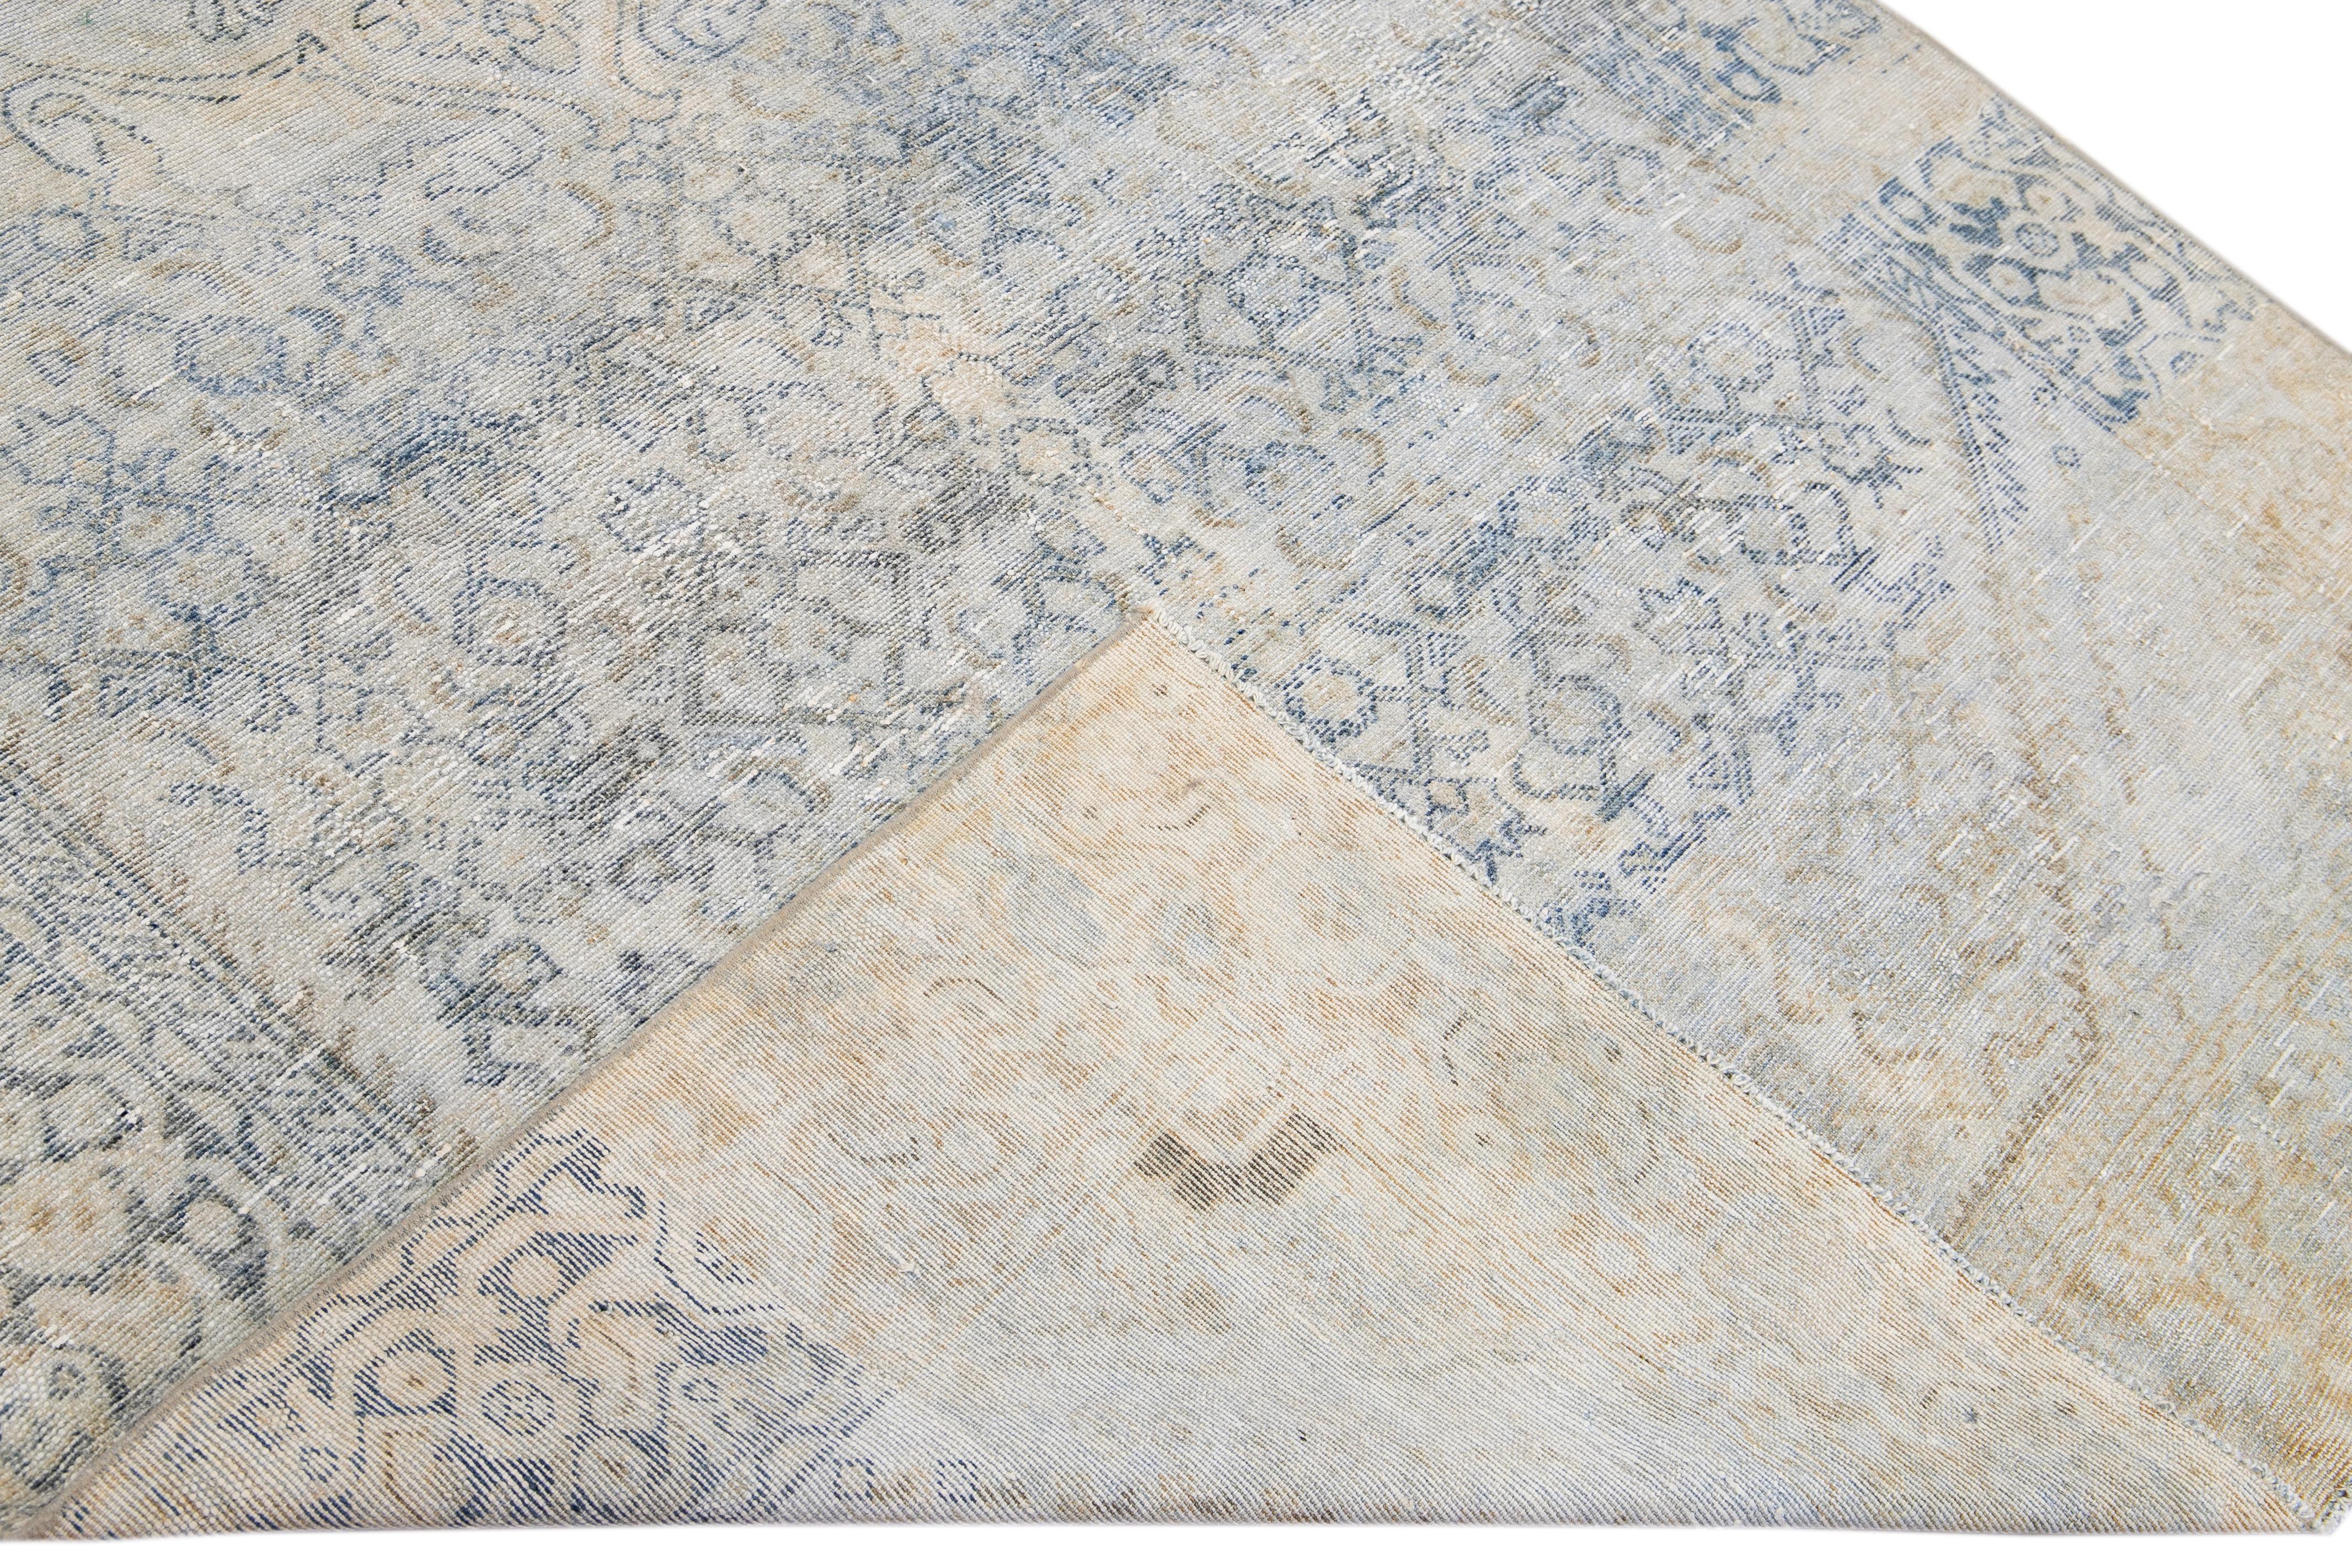 Beautiful hand-knotted antique Mahal wool rug with the Beige field. This Persian rug has blue accents featuring a traditional medallion floral design. 

This rug measures 5'4